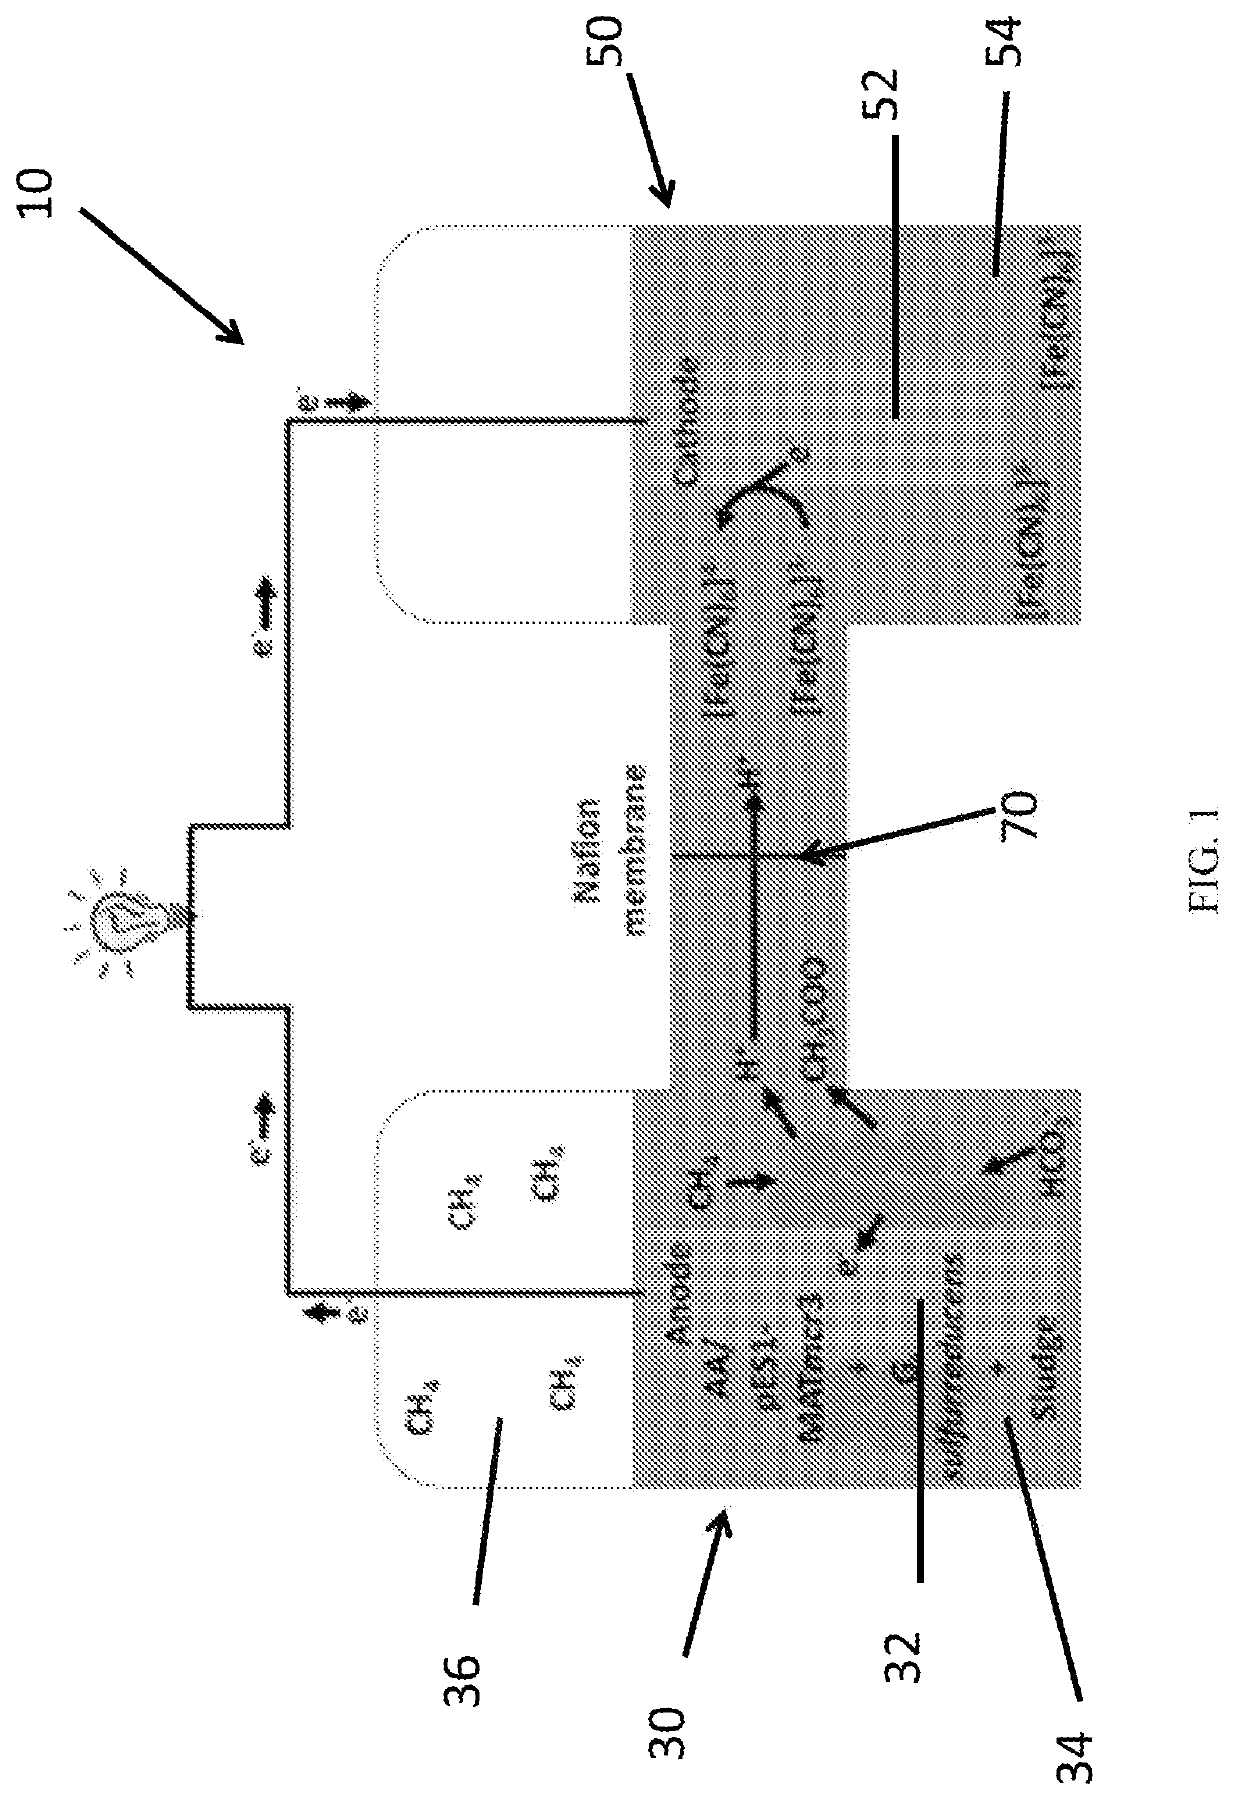 Devices and methods for generating electrical current from methane